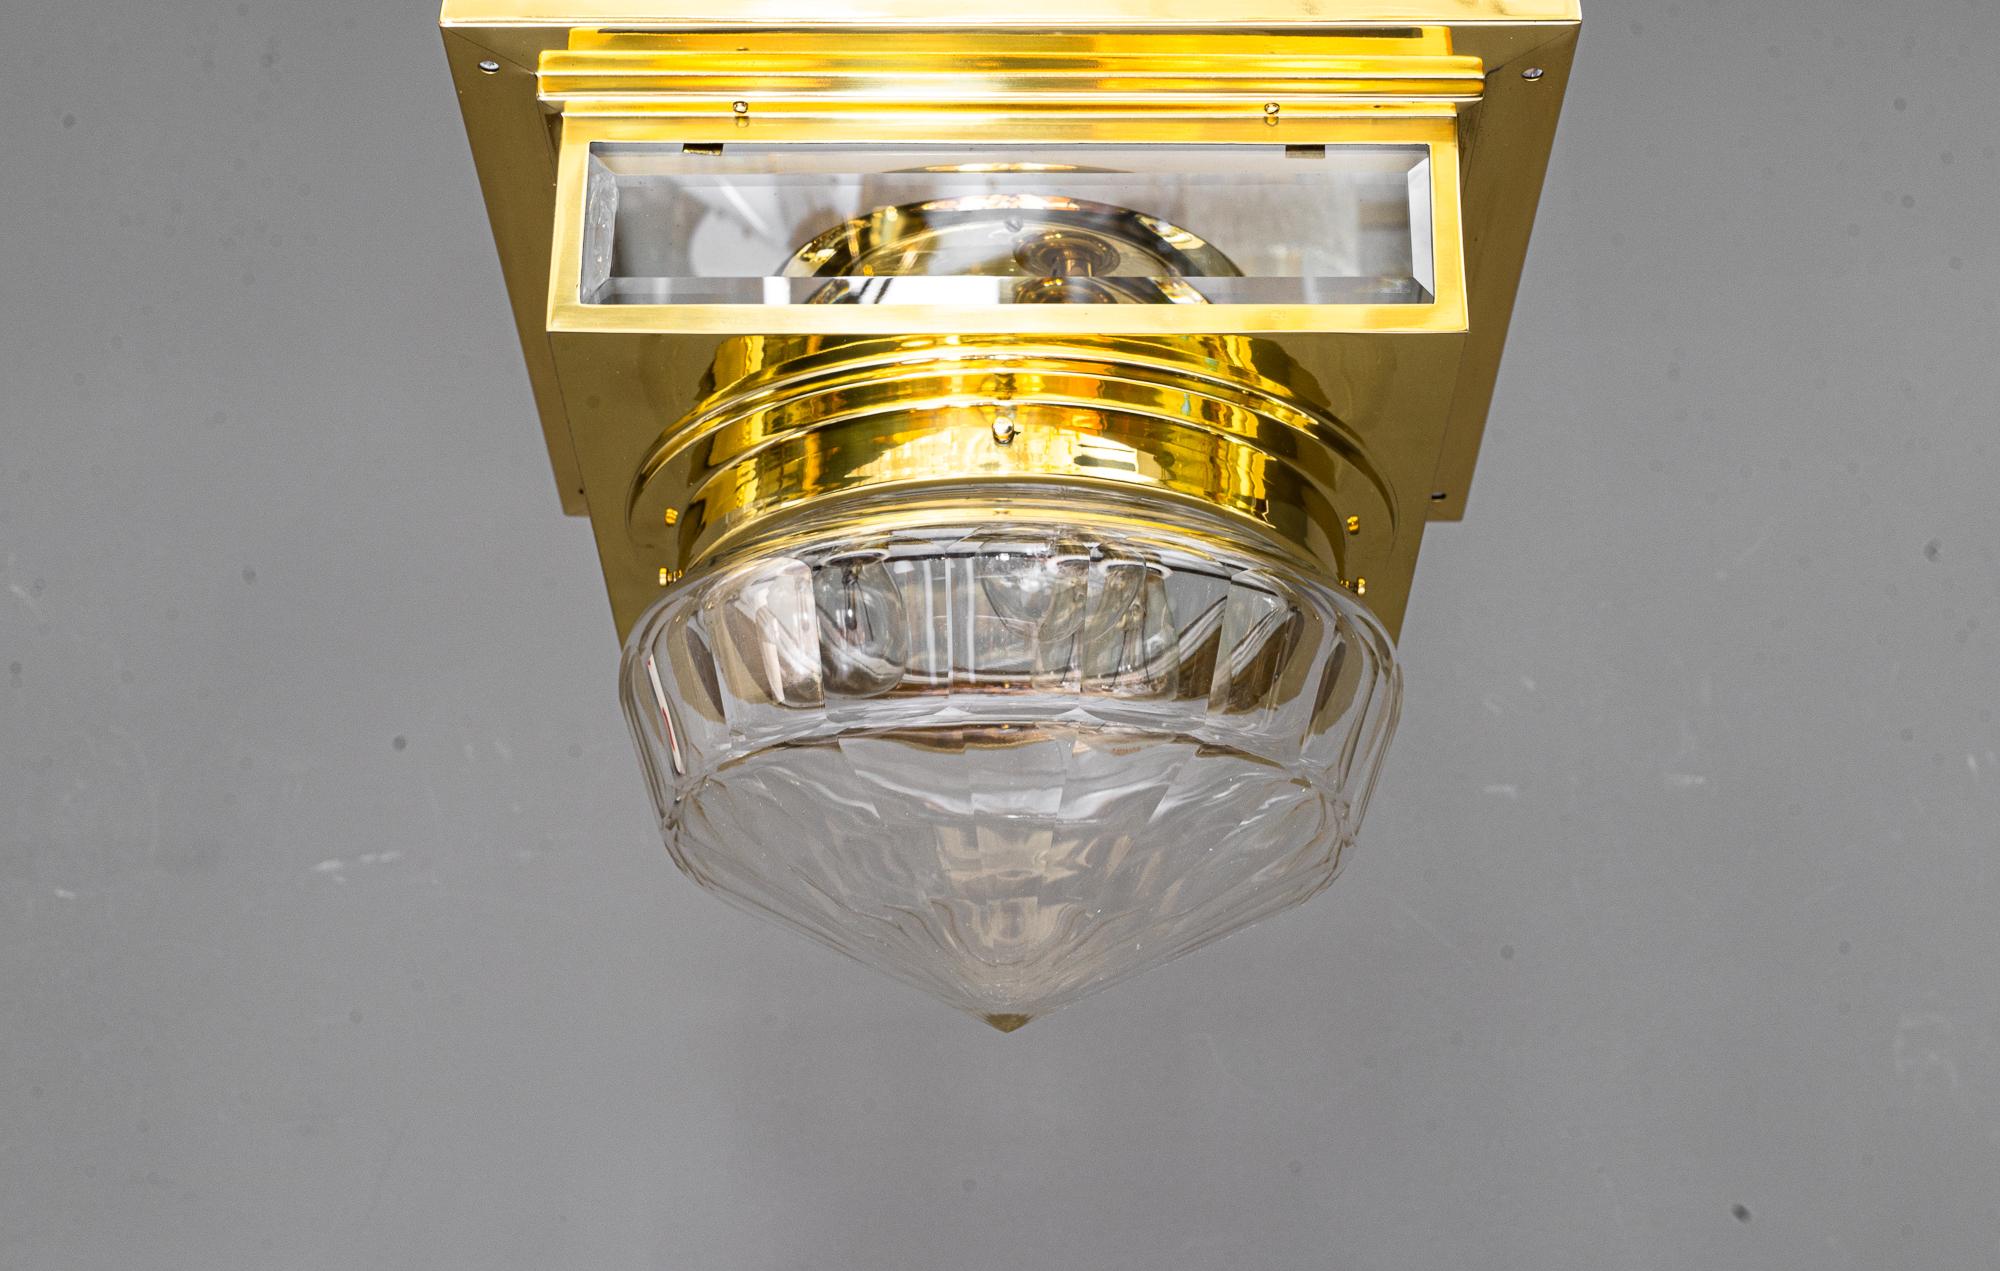 Austrian Art Deco ceiling lamp with an hight quality glass shade around 1920s